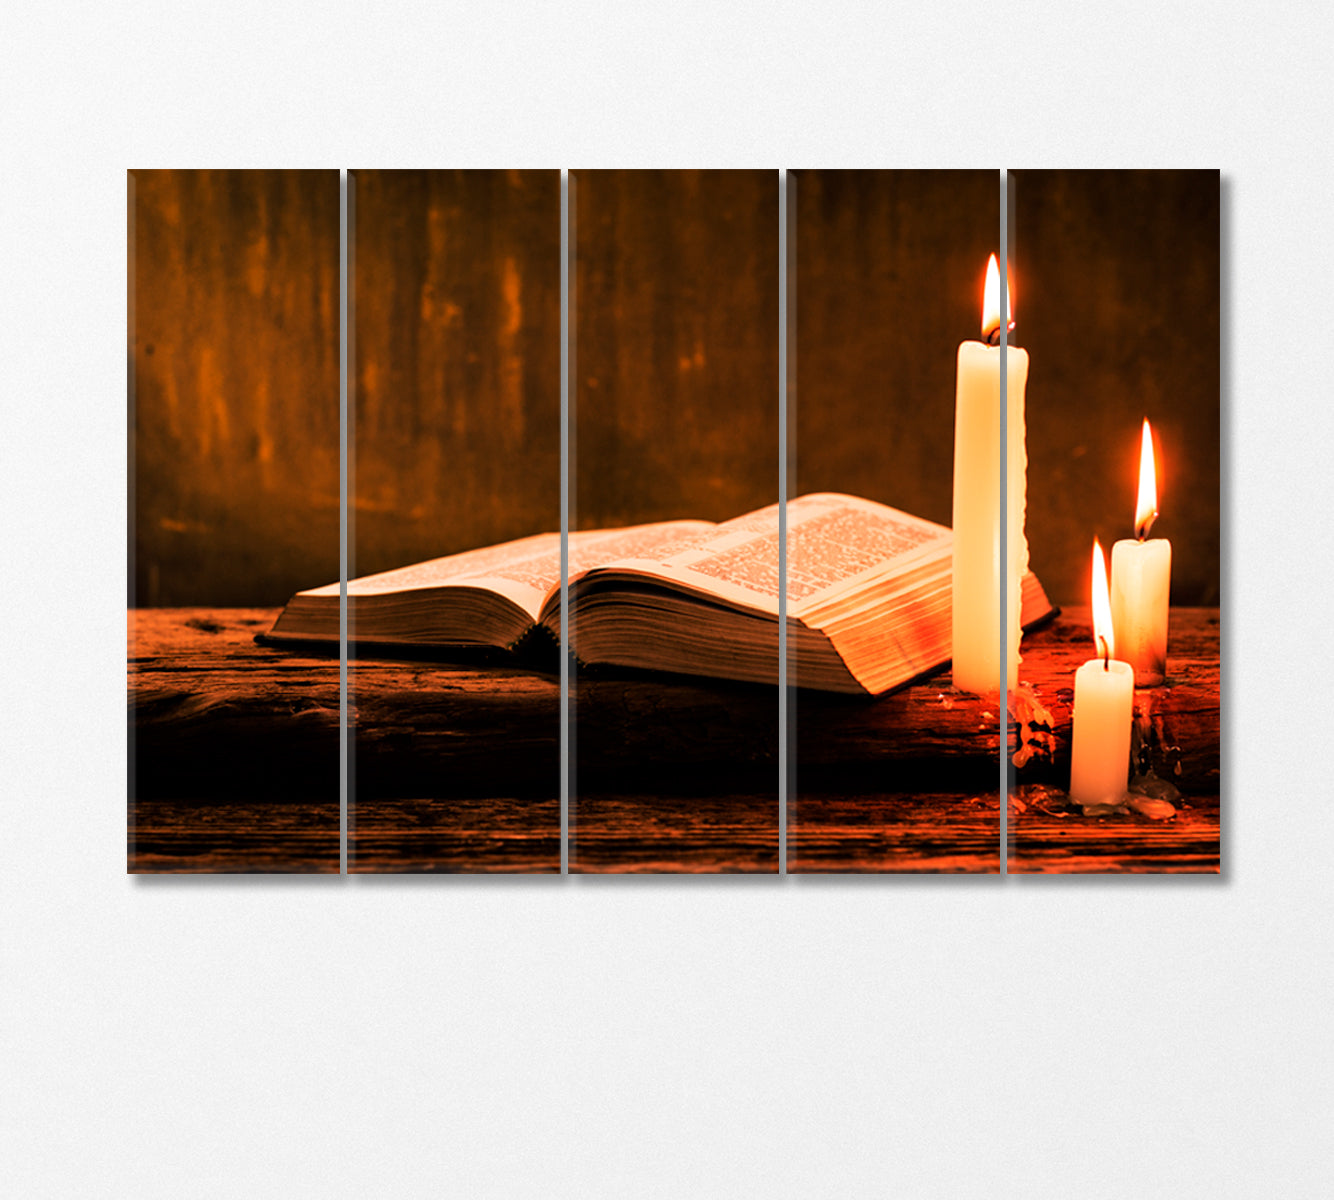 Bible with Candles Canvas Print-CetArt-5 Panels-36x24 inches-CetArt